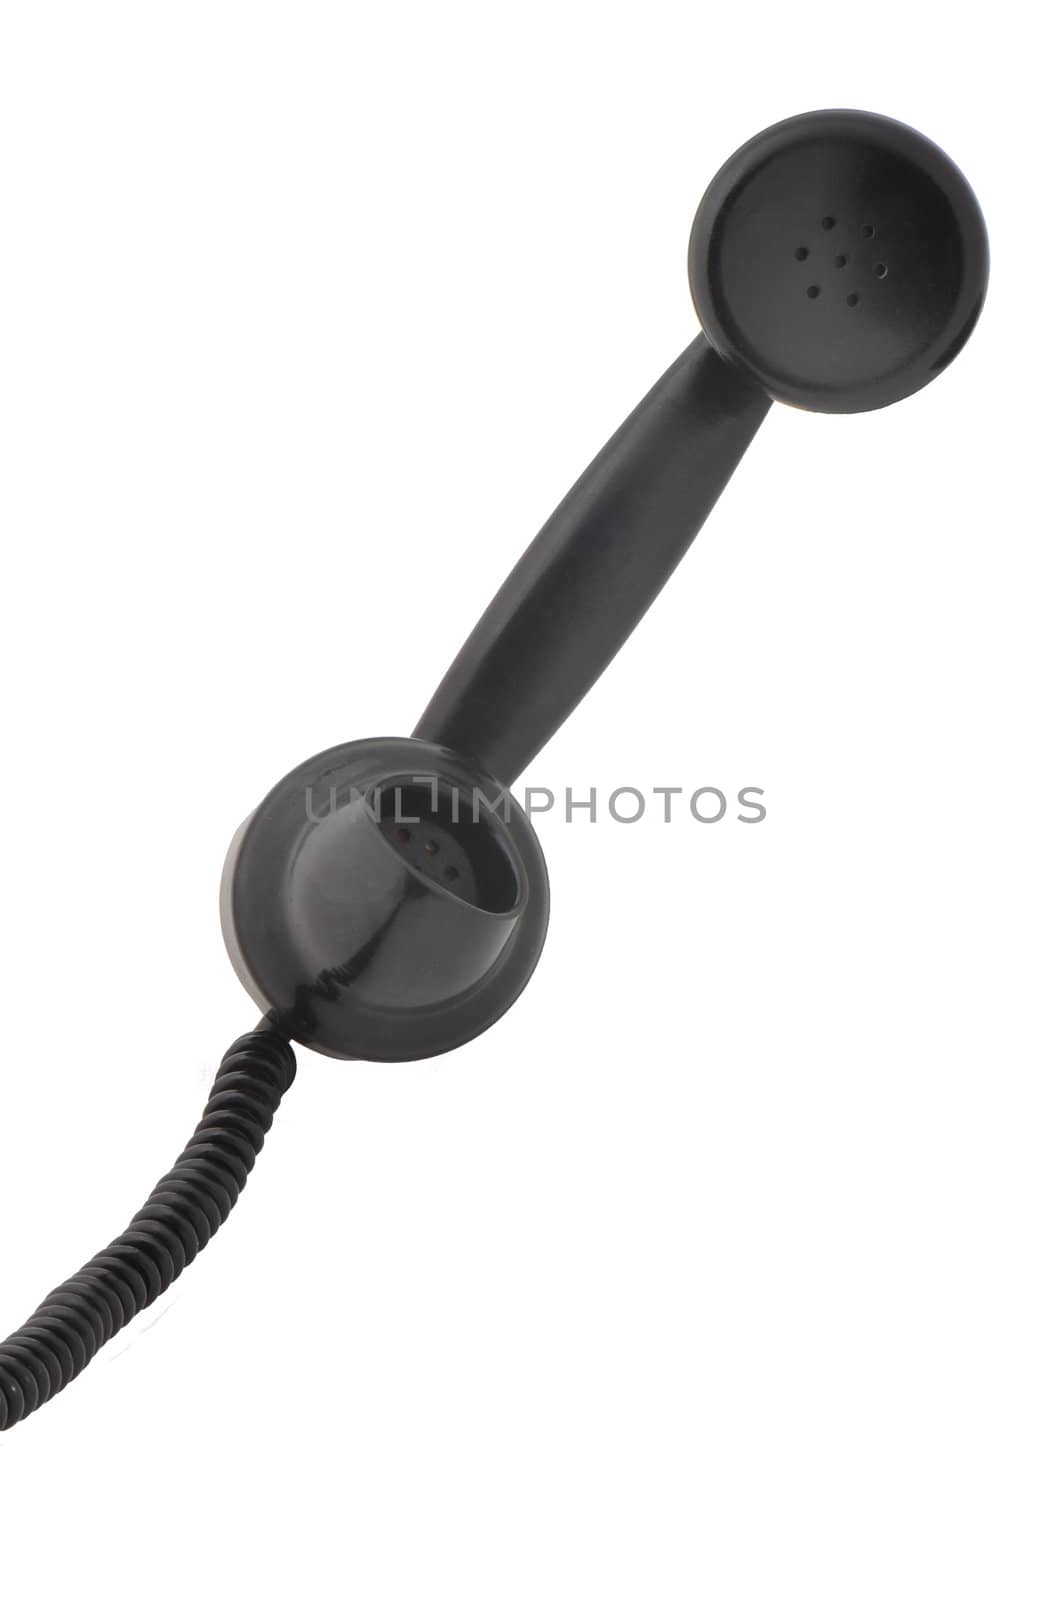 Vintage Phone Handset by ejkrouse